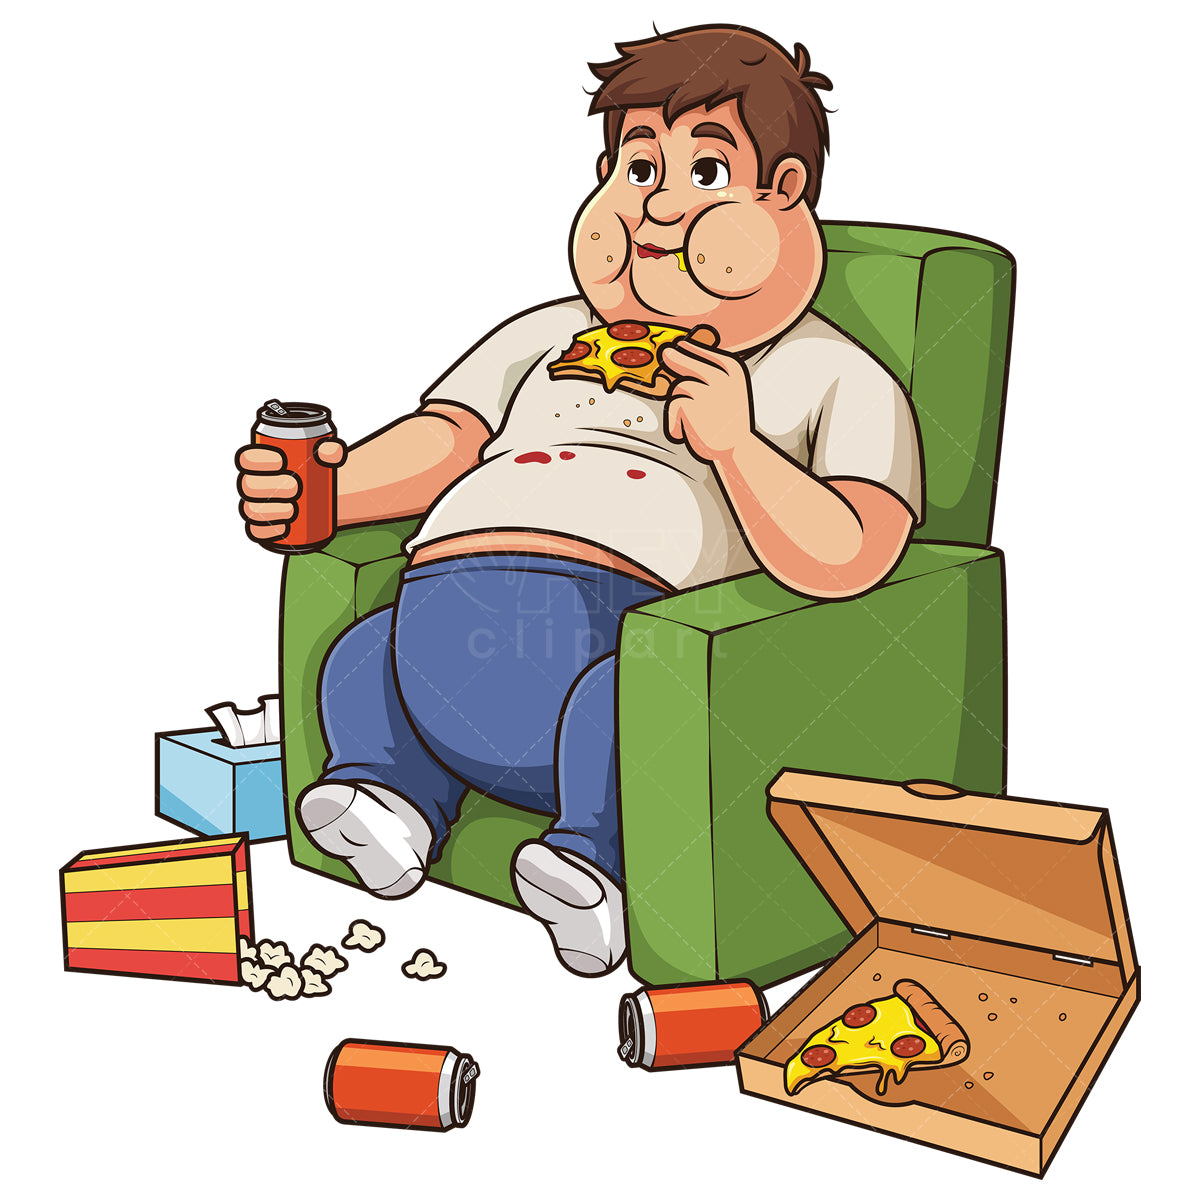 Royalty-free stock vector illustration of a sloppy man on lounge chair eating junk food.